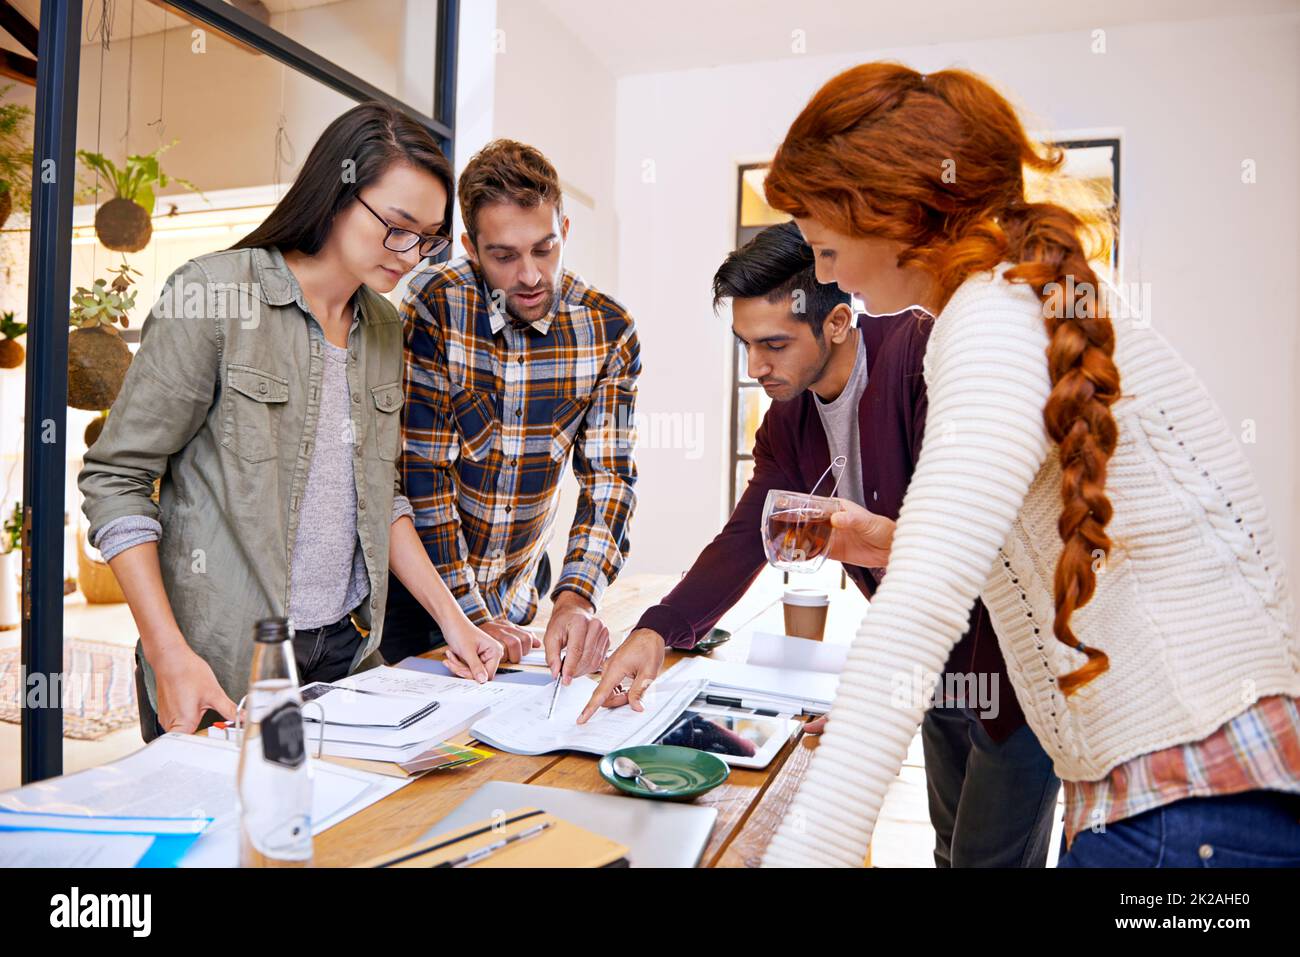 Bringing their ideas to the table. a team of young designers working together in their office. Stock Photo